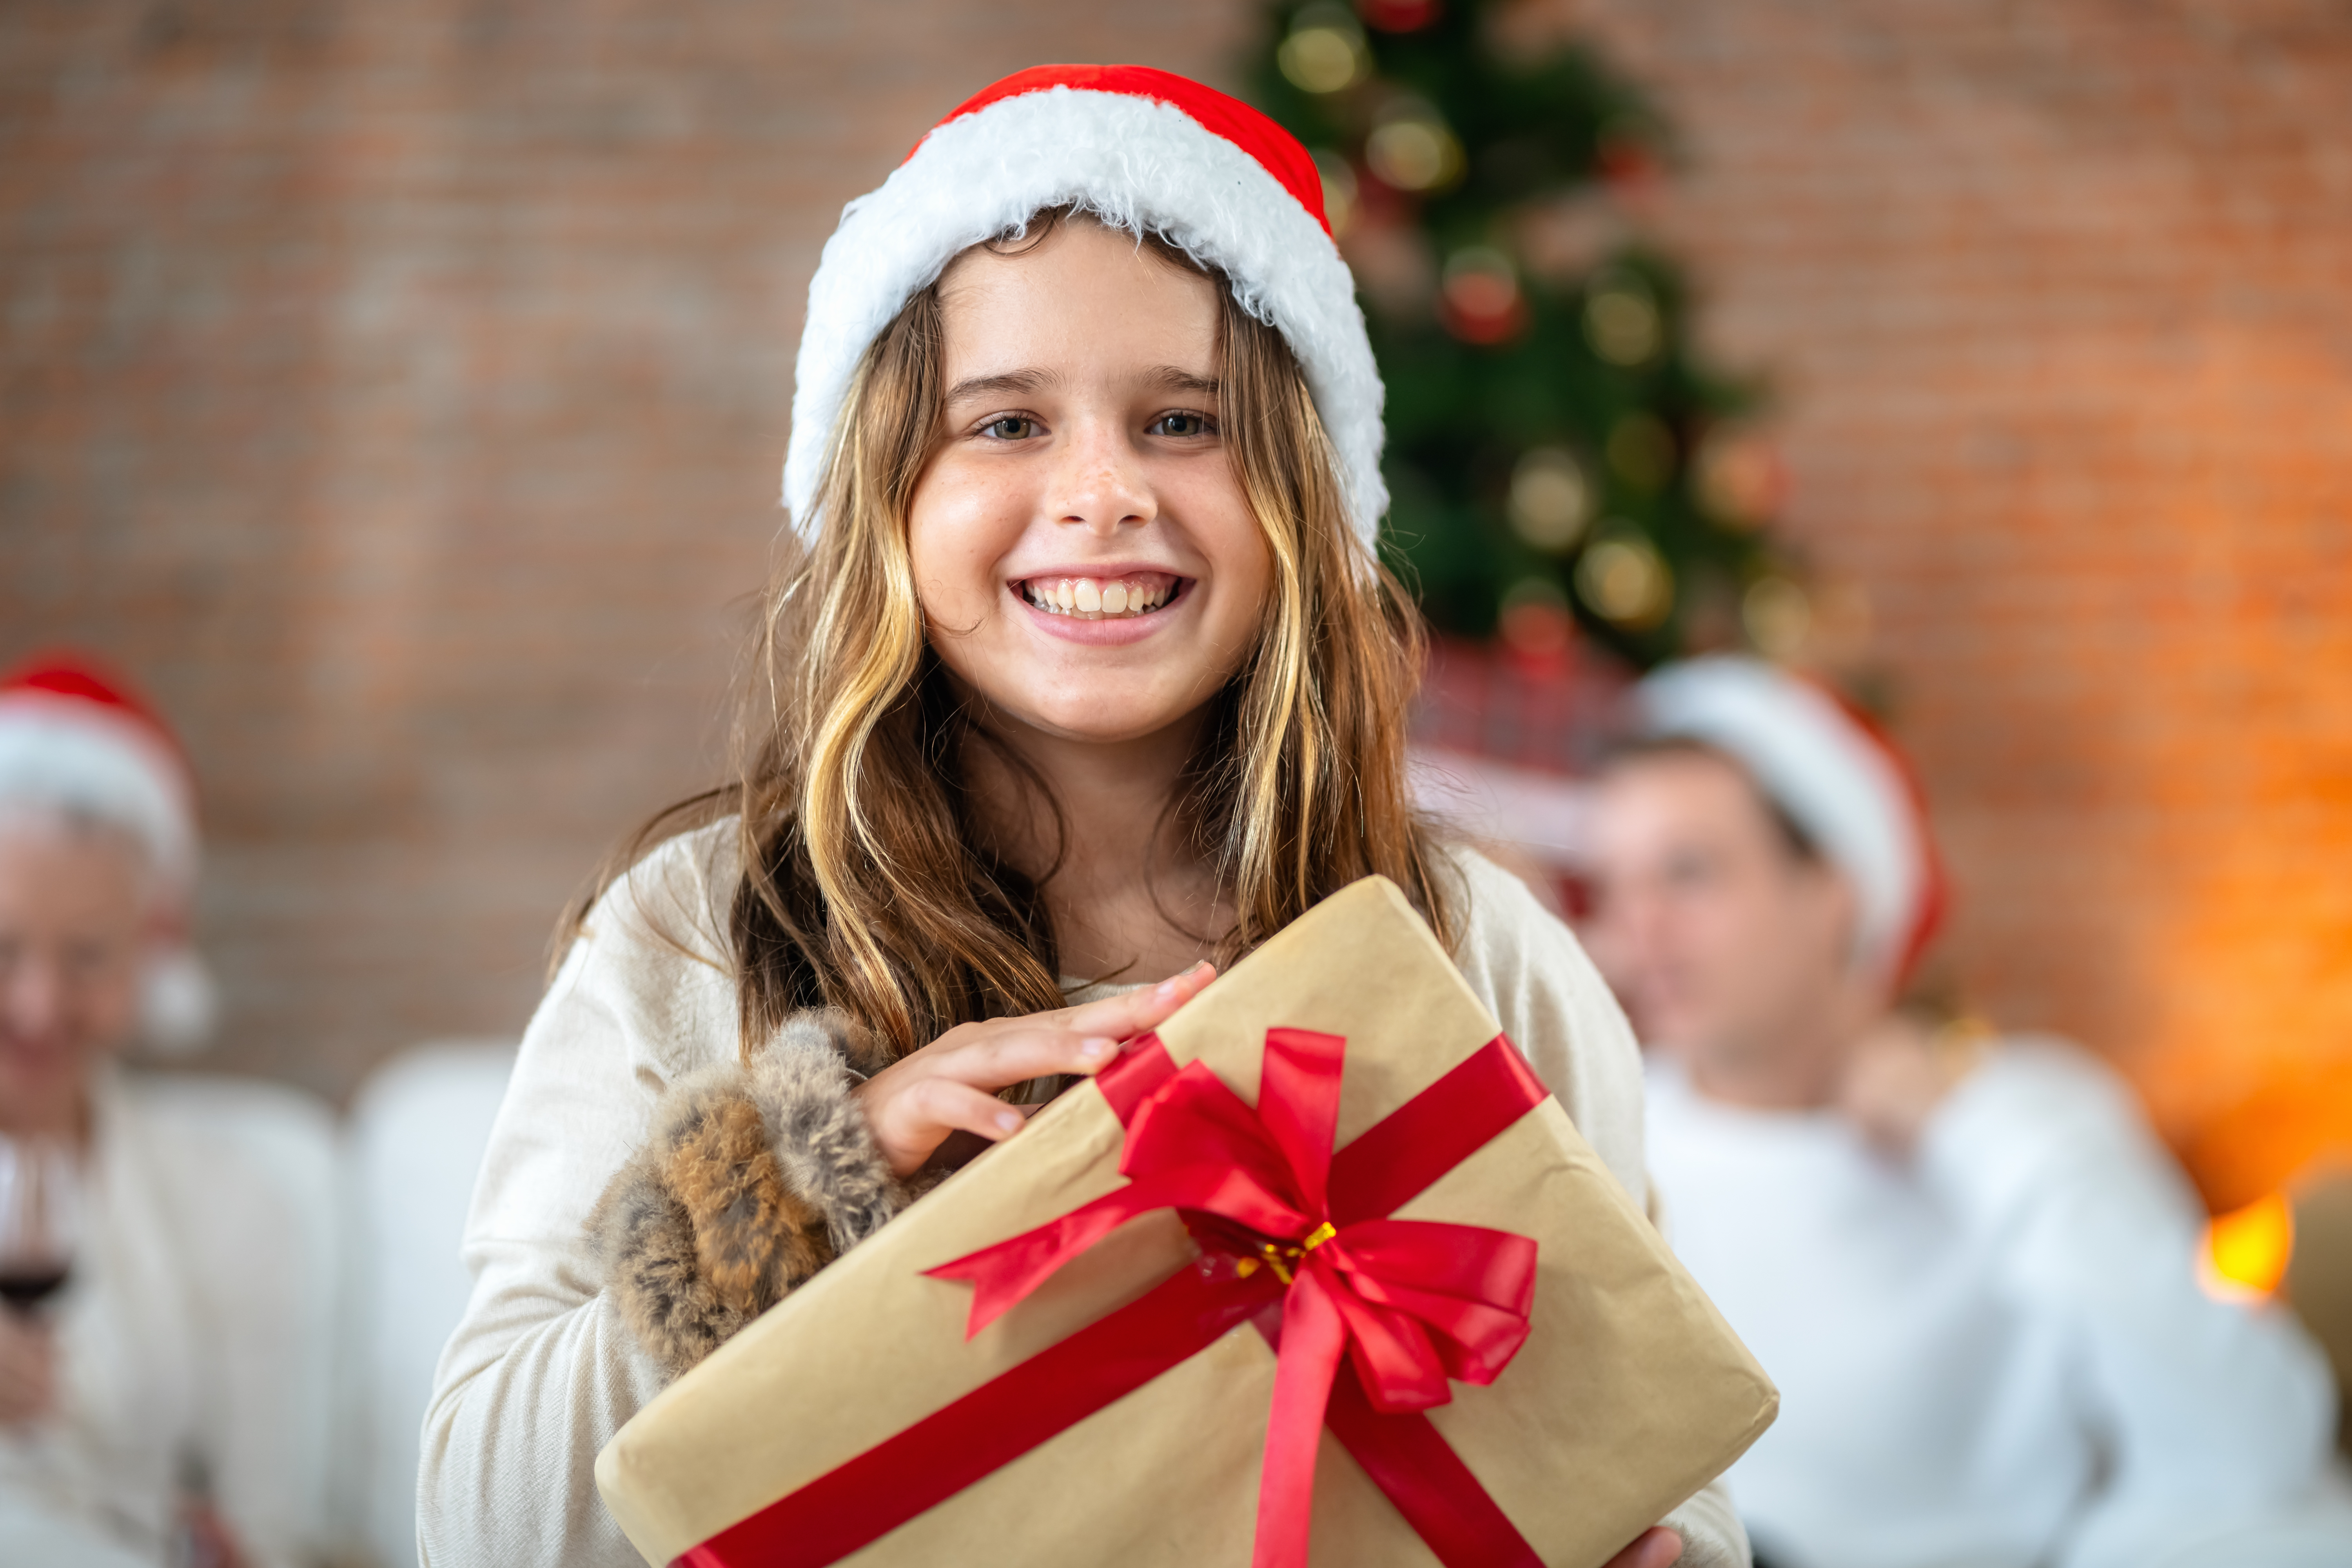 A young girl holding a gift box smiles happily on Christmas Day. | Source: Getty Images